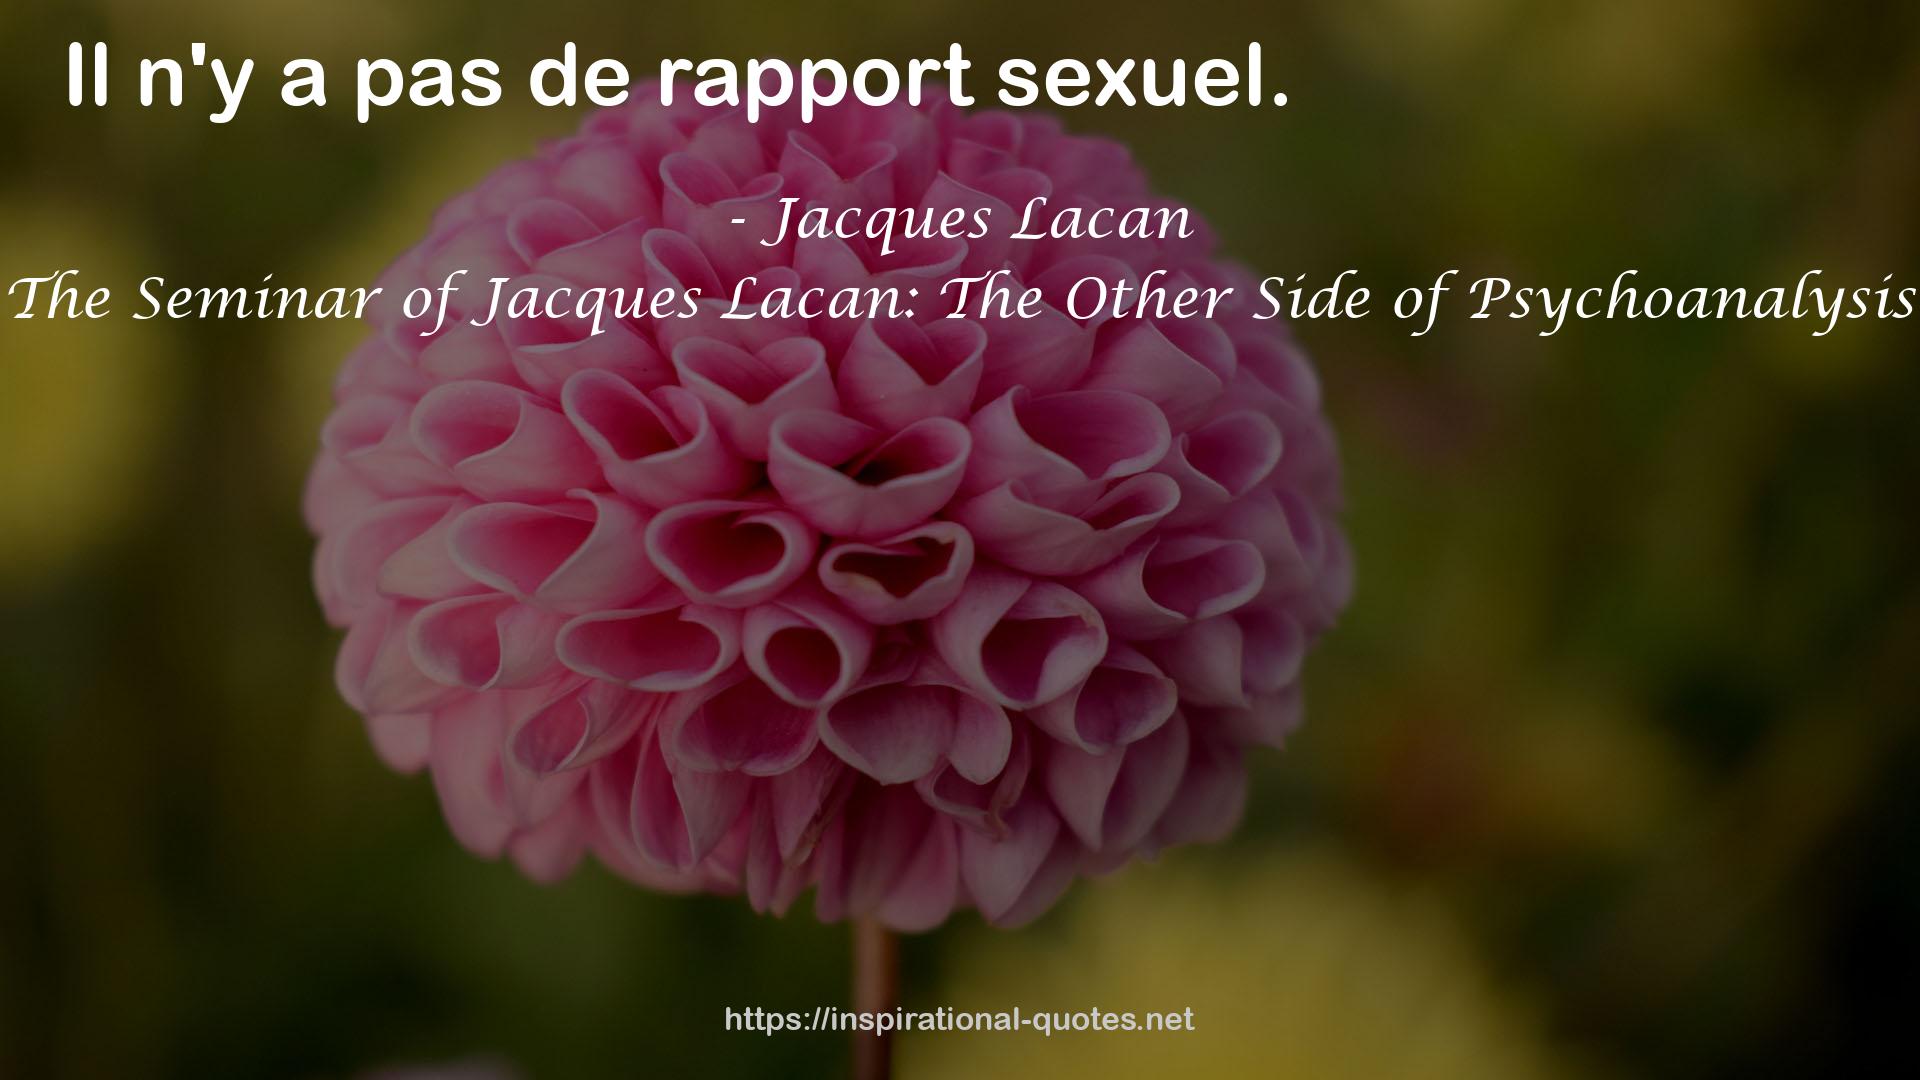 The Seminar of Jacques Lacan: The Other Side of Psychoanalysis QUOTES